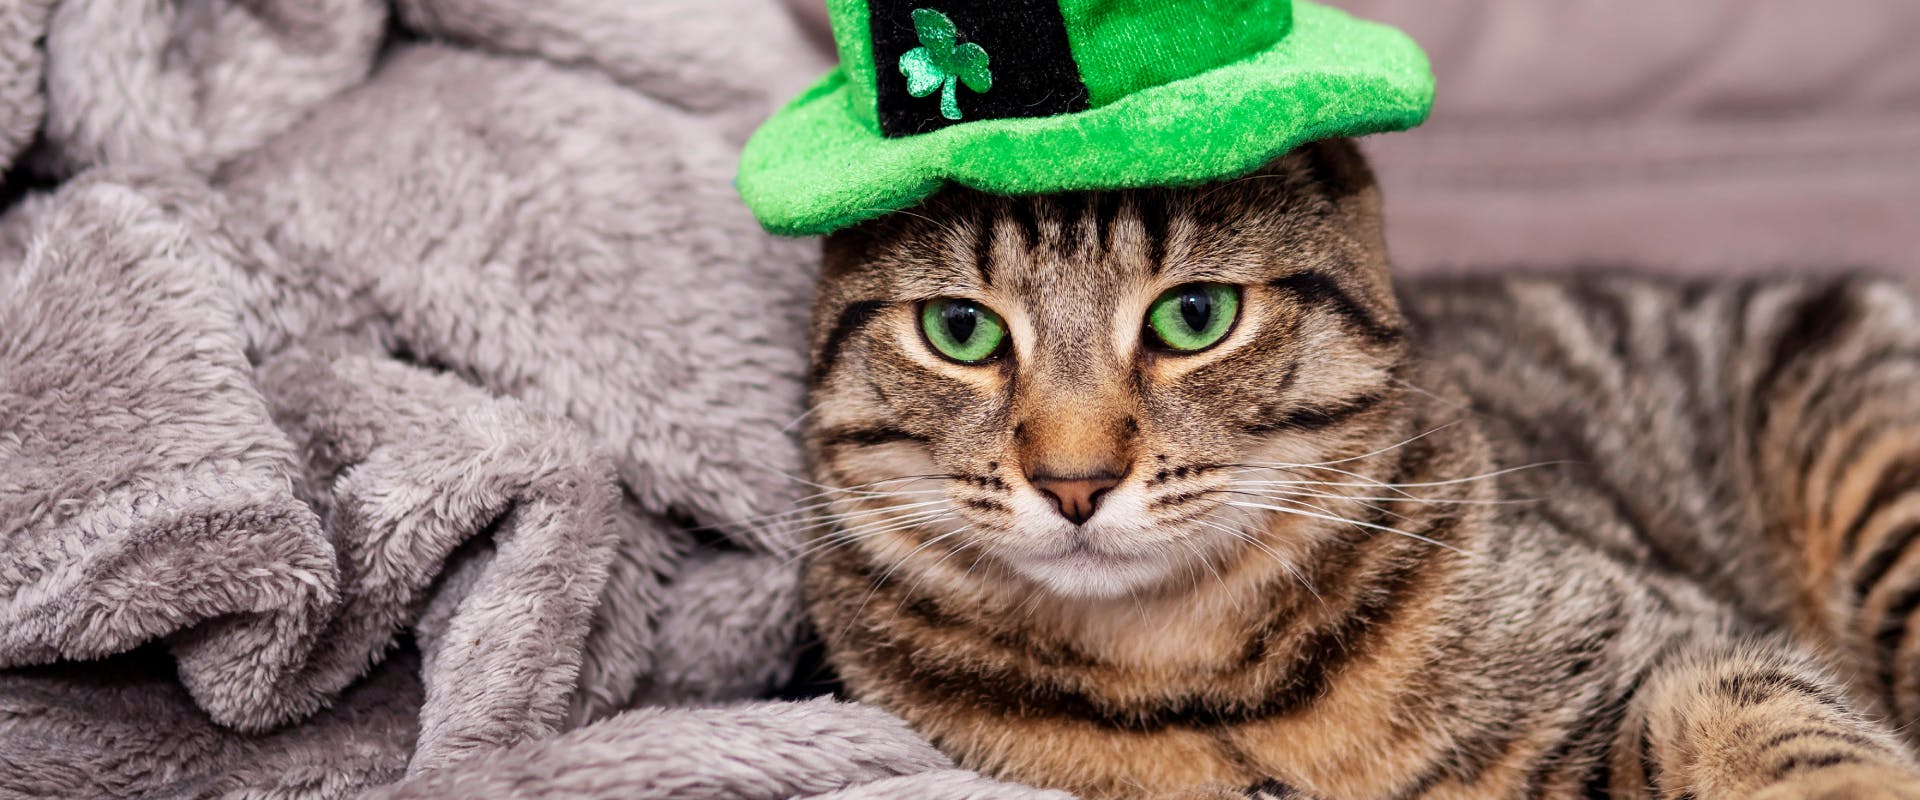 tabby cat with bright green eyes wearing a shamrock hat